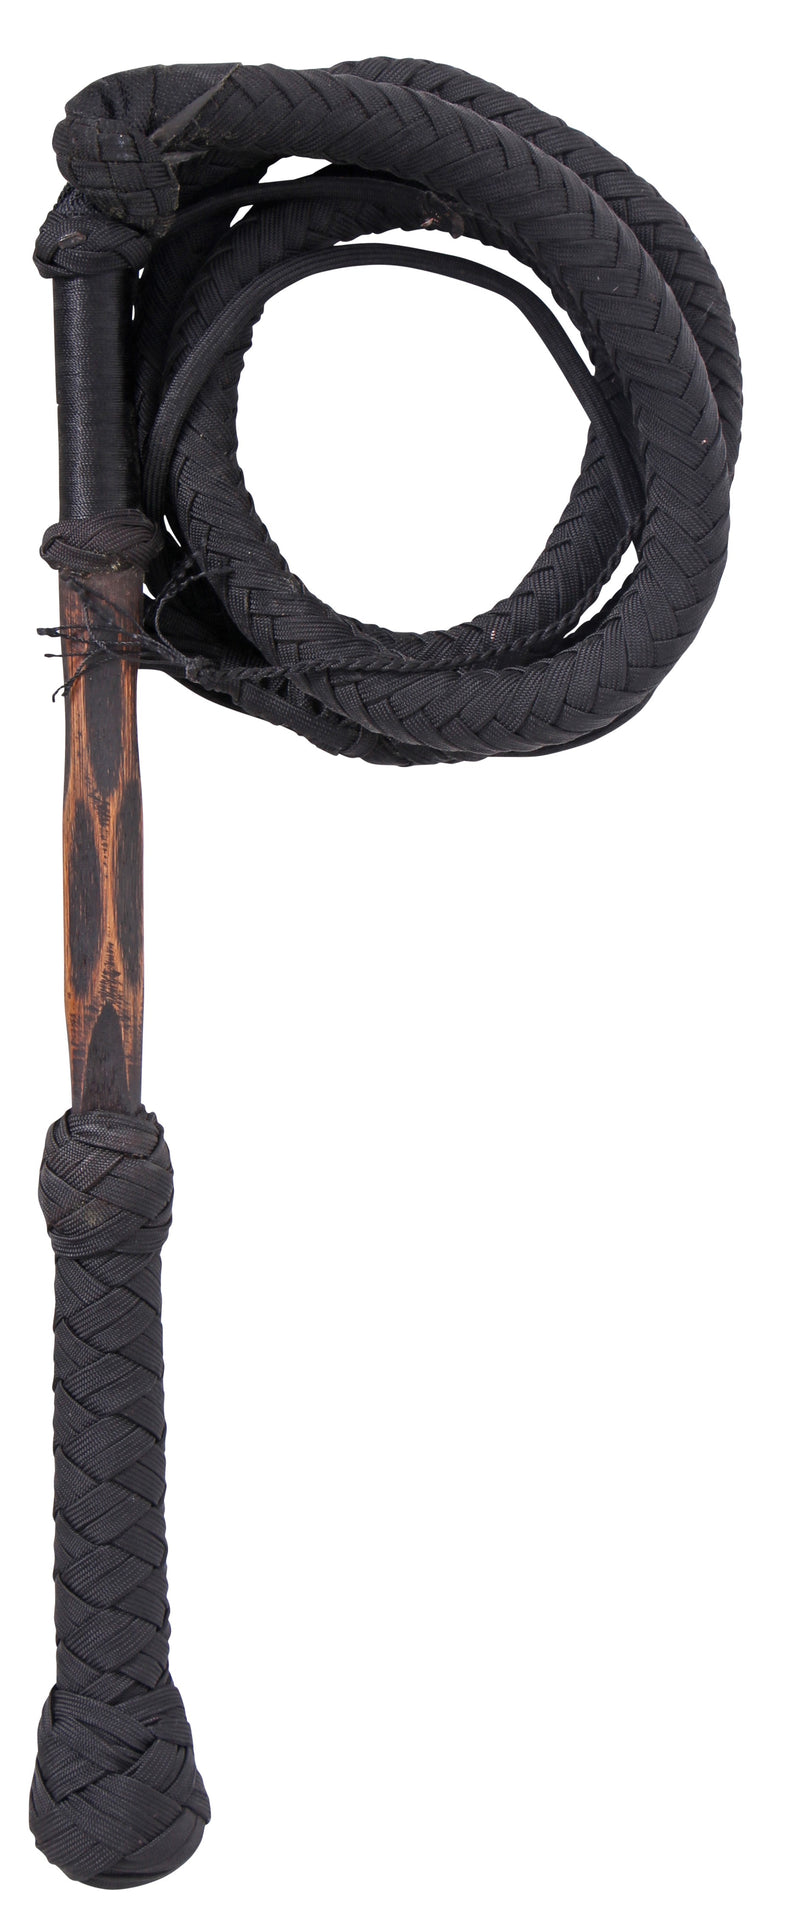 DOUBLE HILL SYNTHETIC STOCK WHIP 12 PLAIT